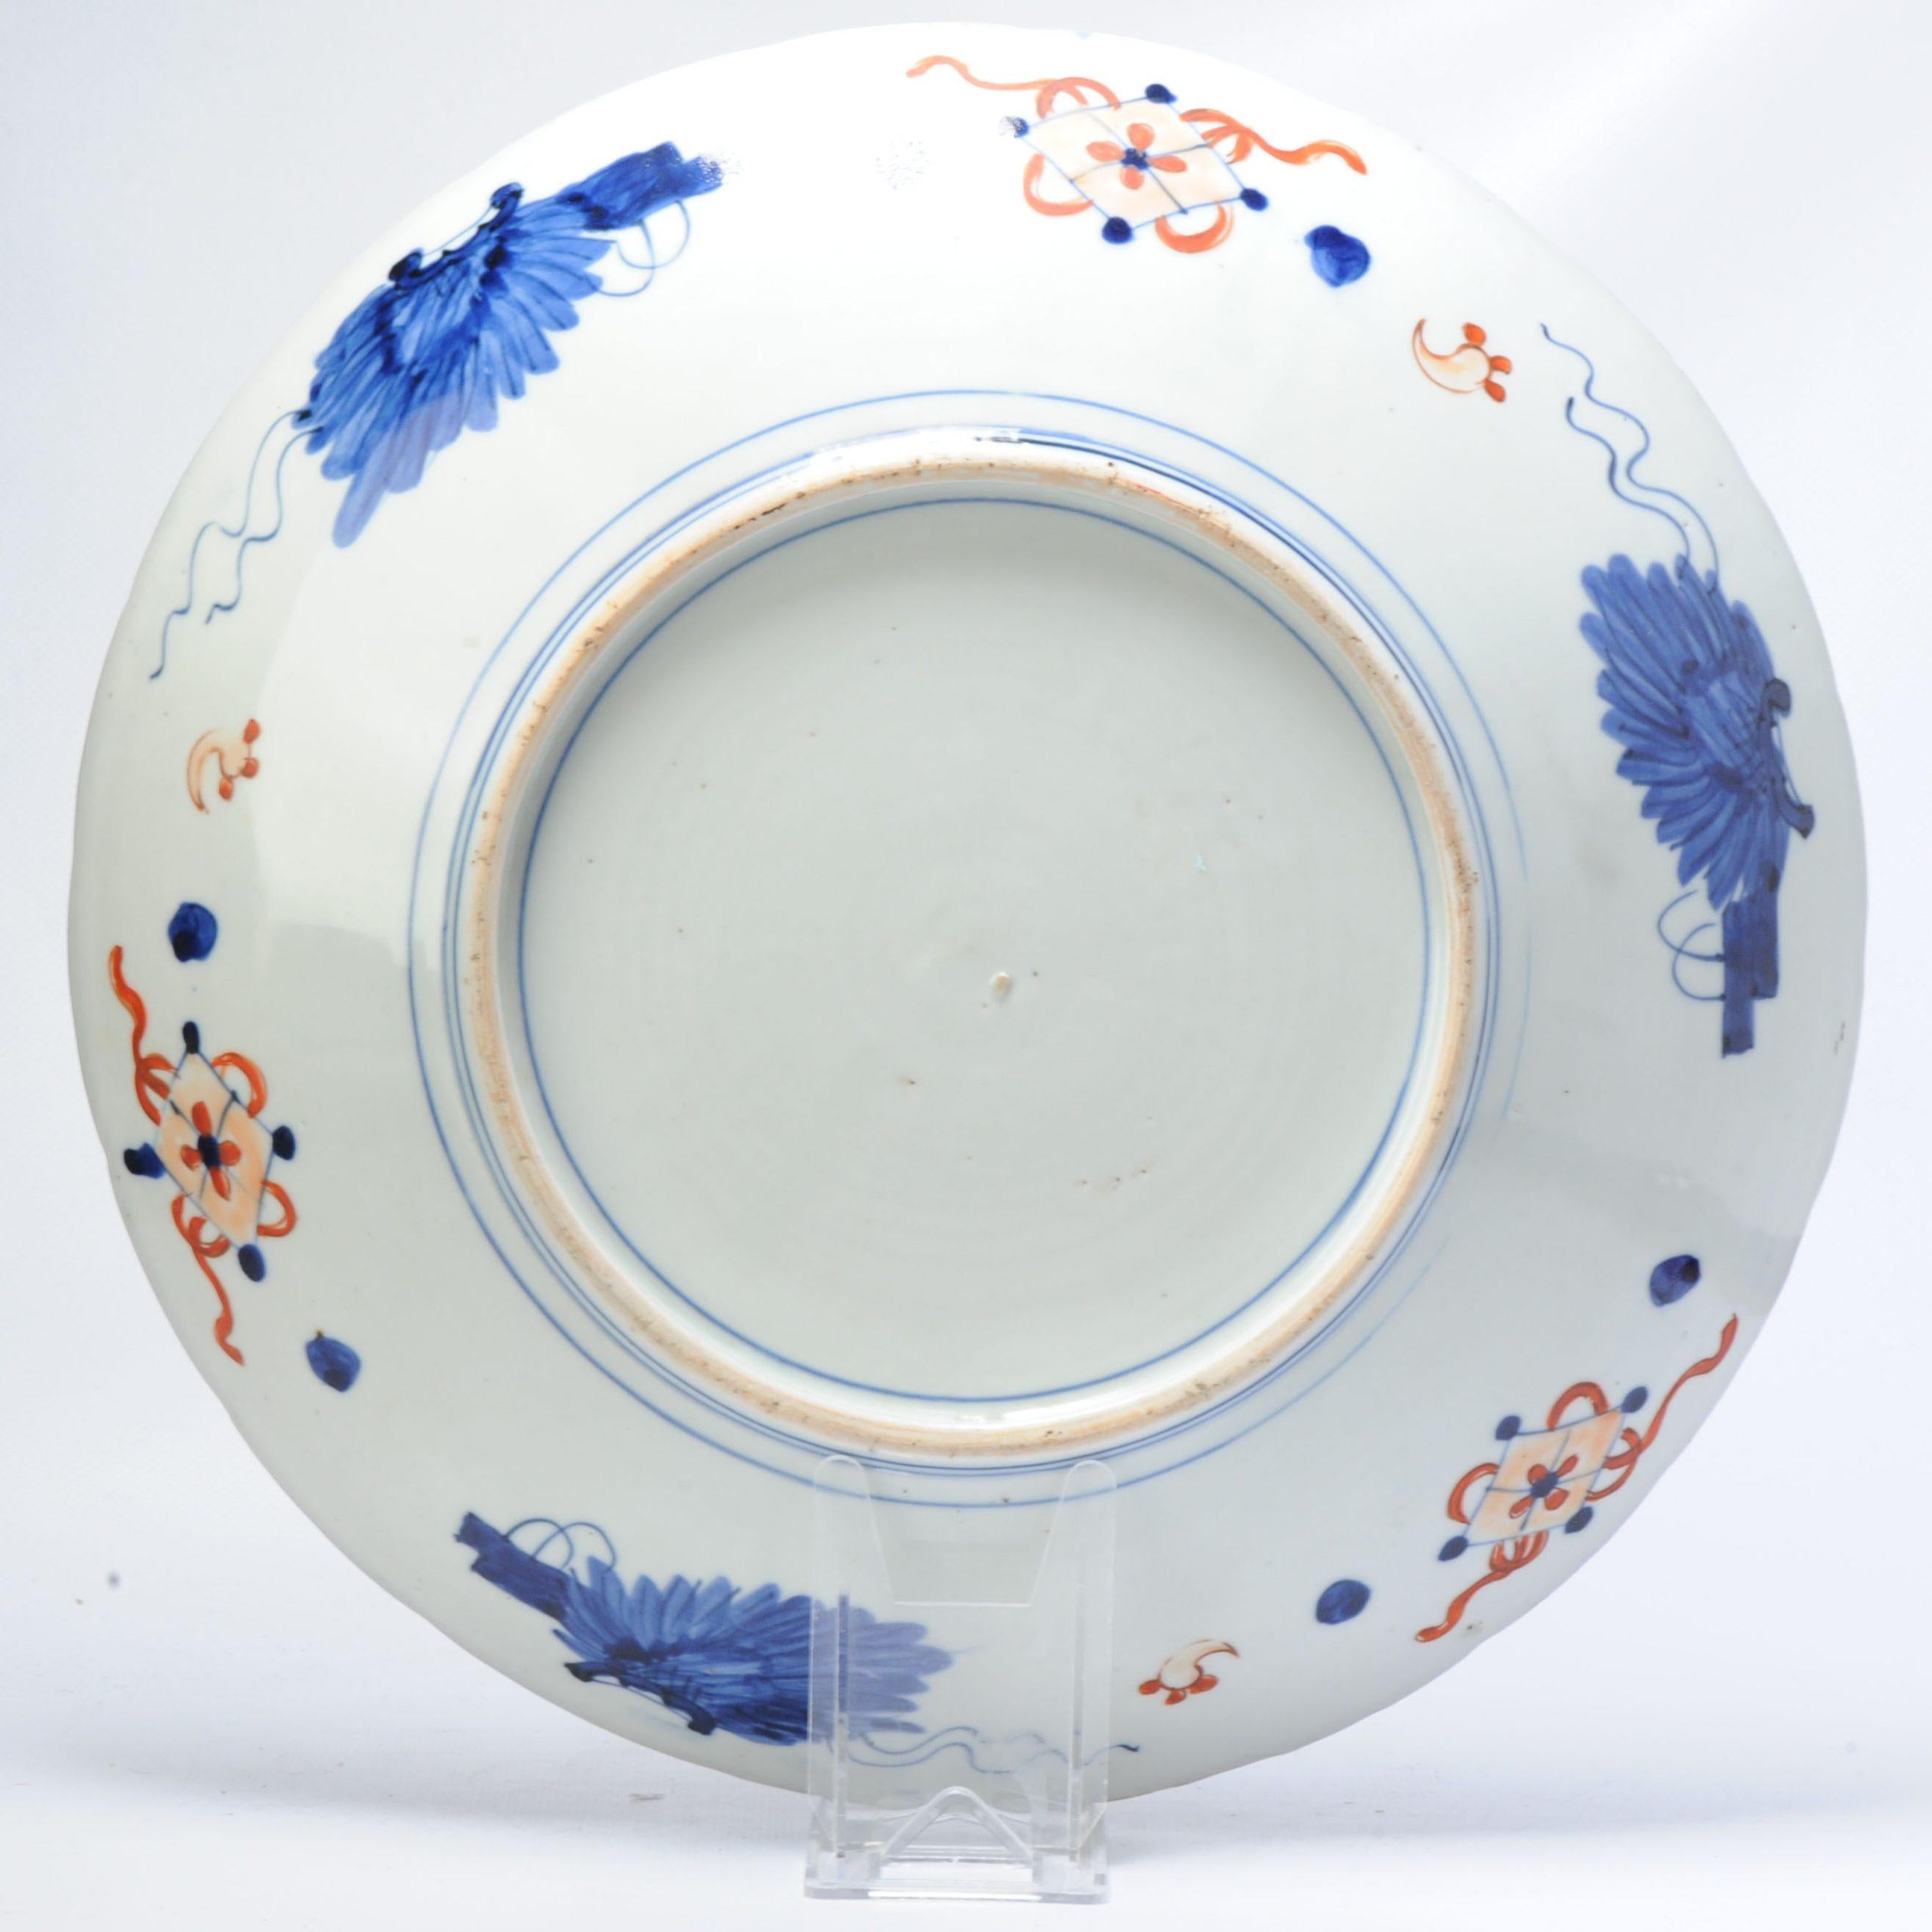 Very lovely piece with a nicely painted scene of warriors.

Additional information:
Material: Porcelain & Pottery
Japanese Style: Arita, Imari
Region of Origin: Japan
Period: 19th century Meiji Periode (1867-1912)
Age: ca 1900
Original/Reproduction: